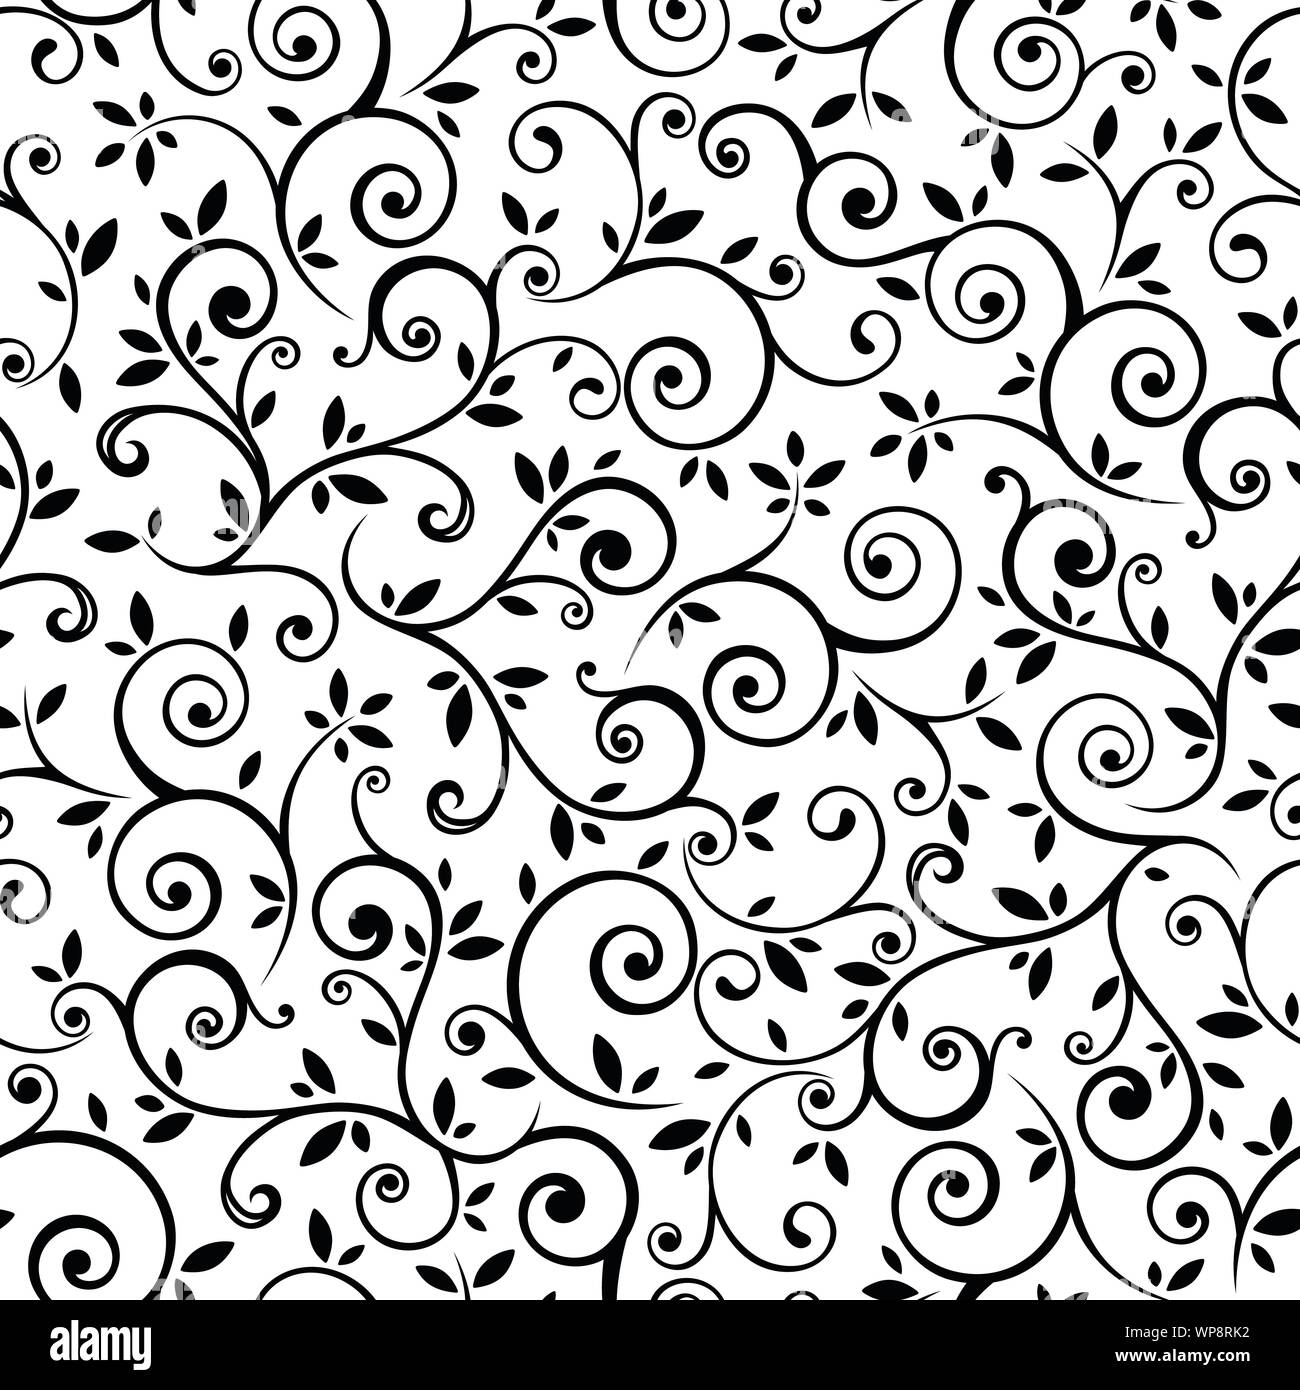 Vector Vintage Seamless Black And White Floral Pattern Stock Vector